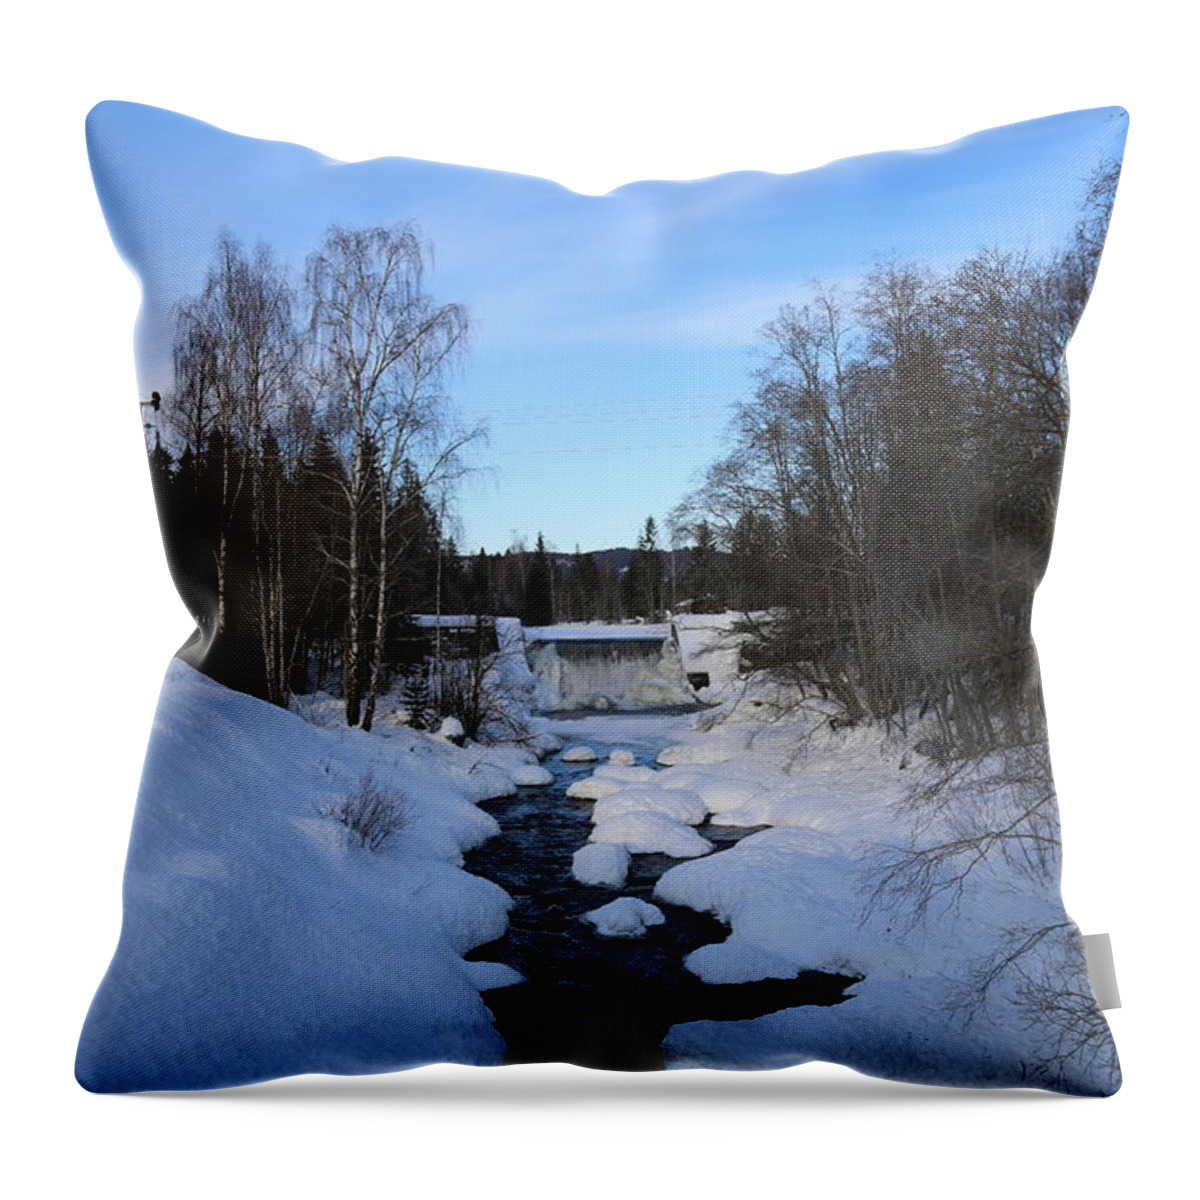 Waterfront Trees Winter Snow Water Bluesky Scandinavia Norway Europe Countryside Trees Throw Pillow featuring the digital art Norwegian Winter landscape. by Jeanette Rode Dybdahl